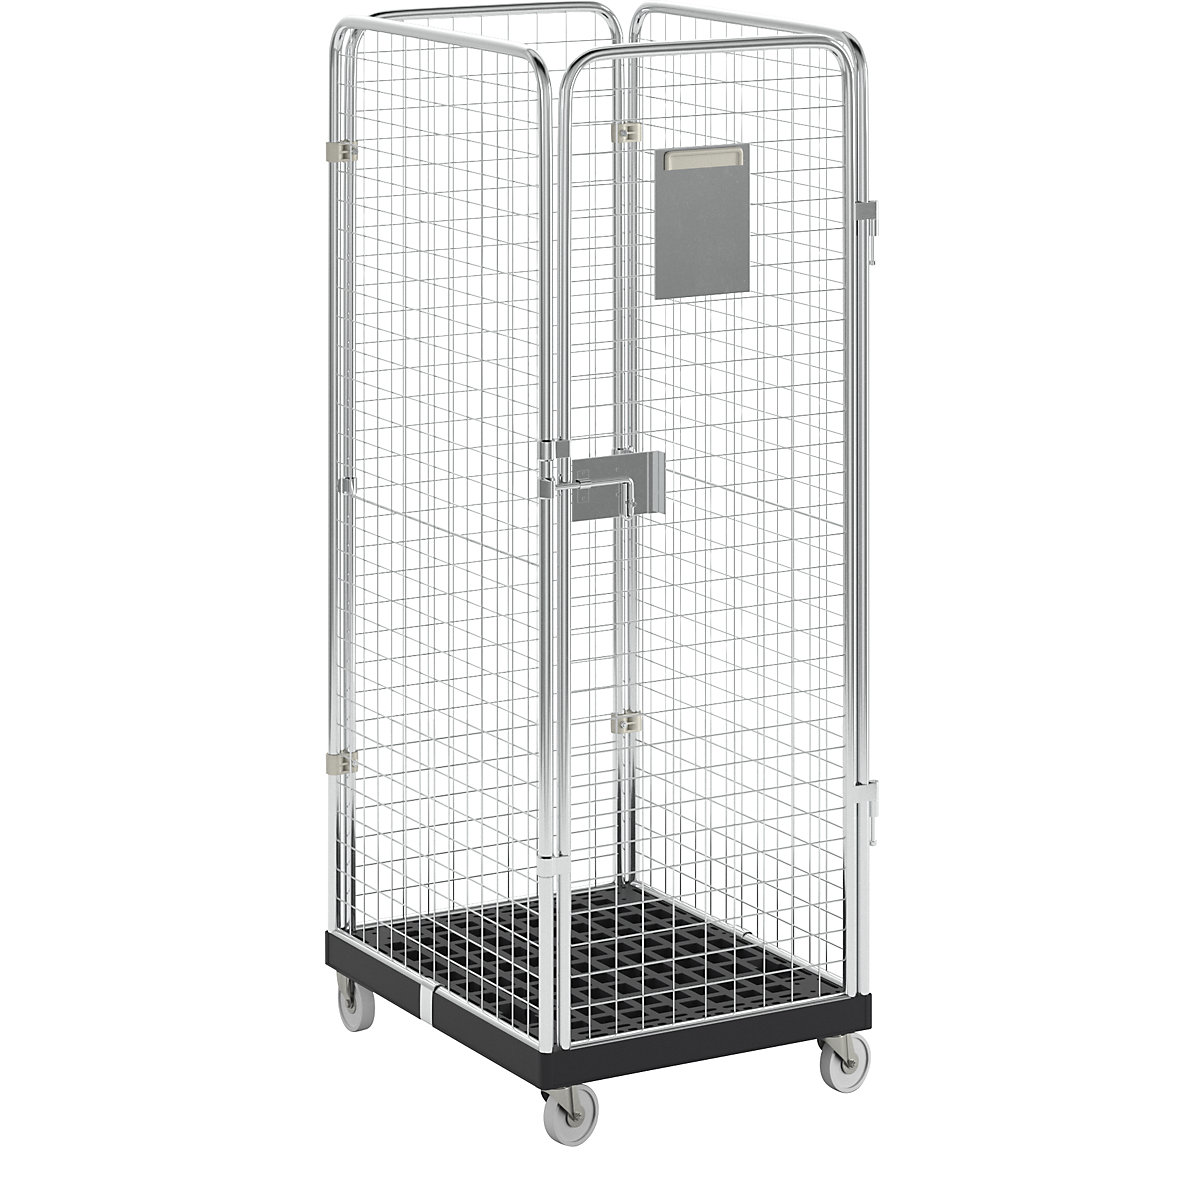 Roll container with mesh panels - eurokraft basic